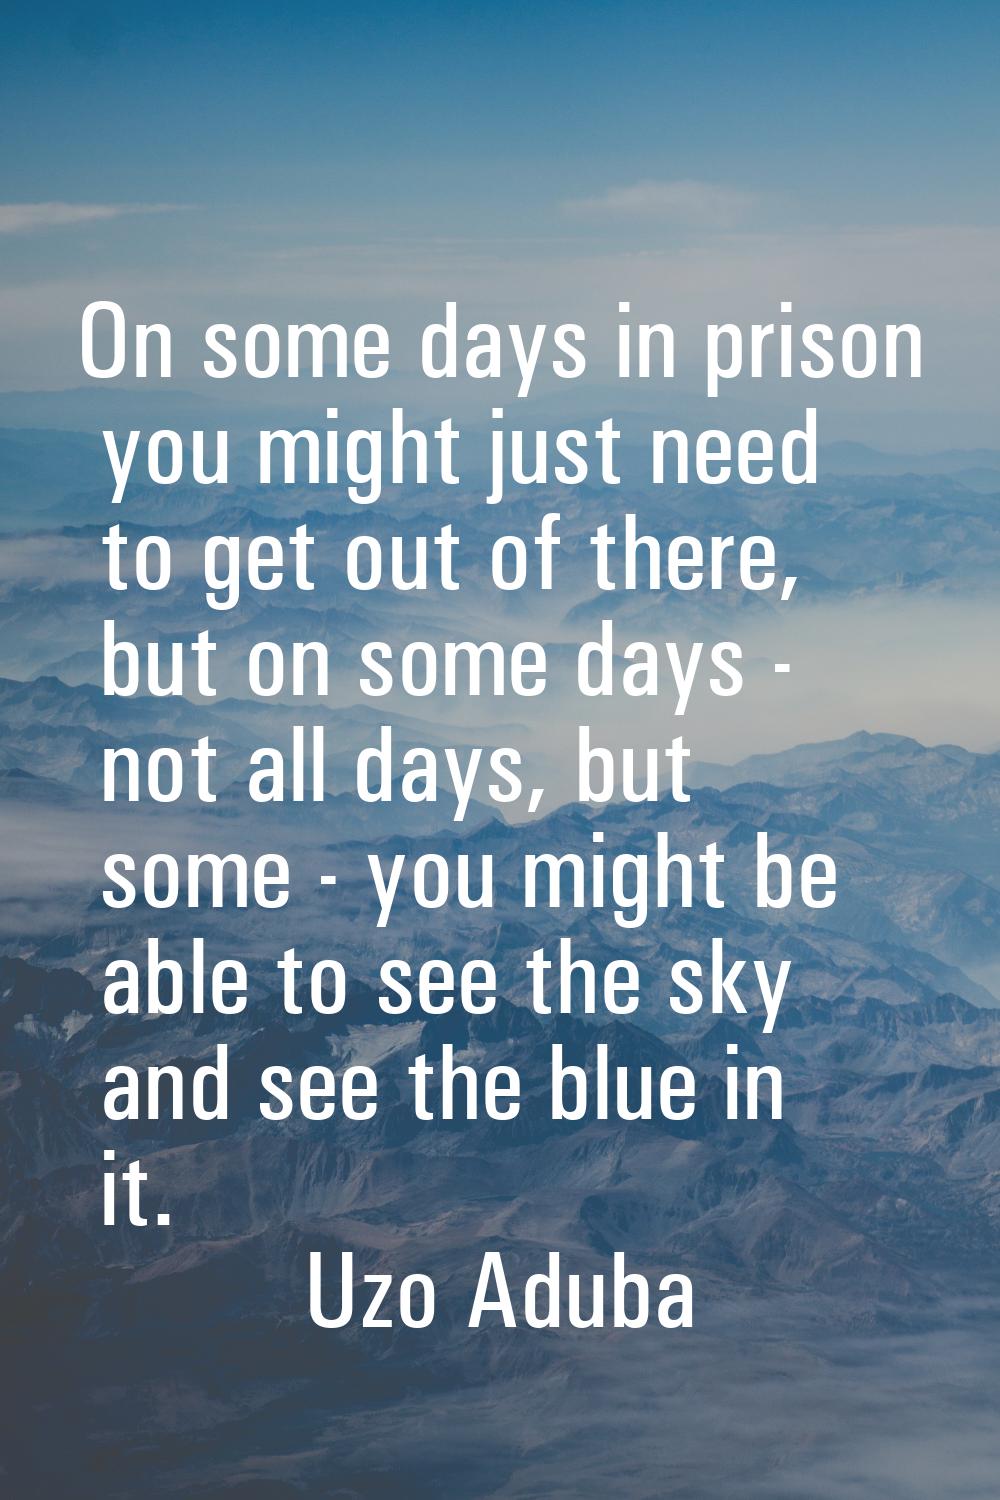 On some days in prison you might just need to get out of there, but on some days - not all days, bu